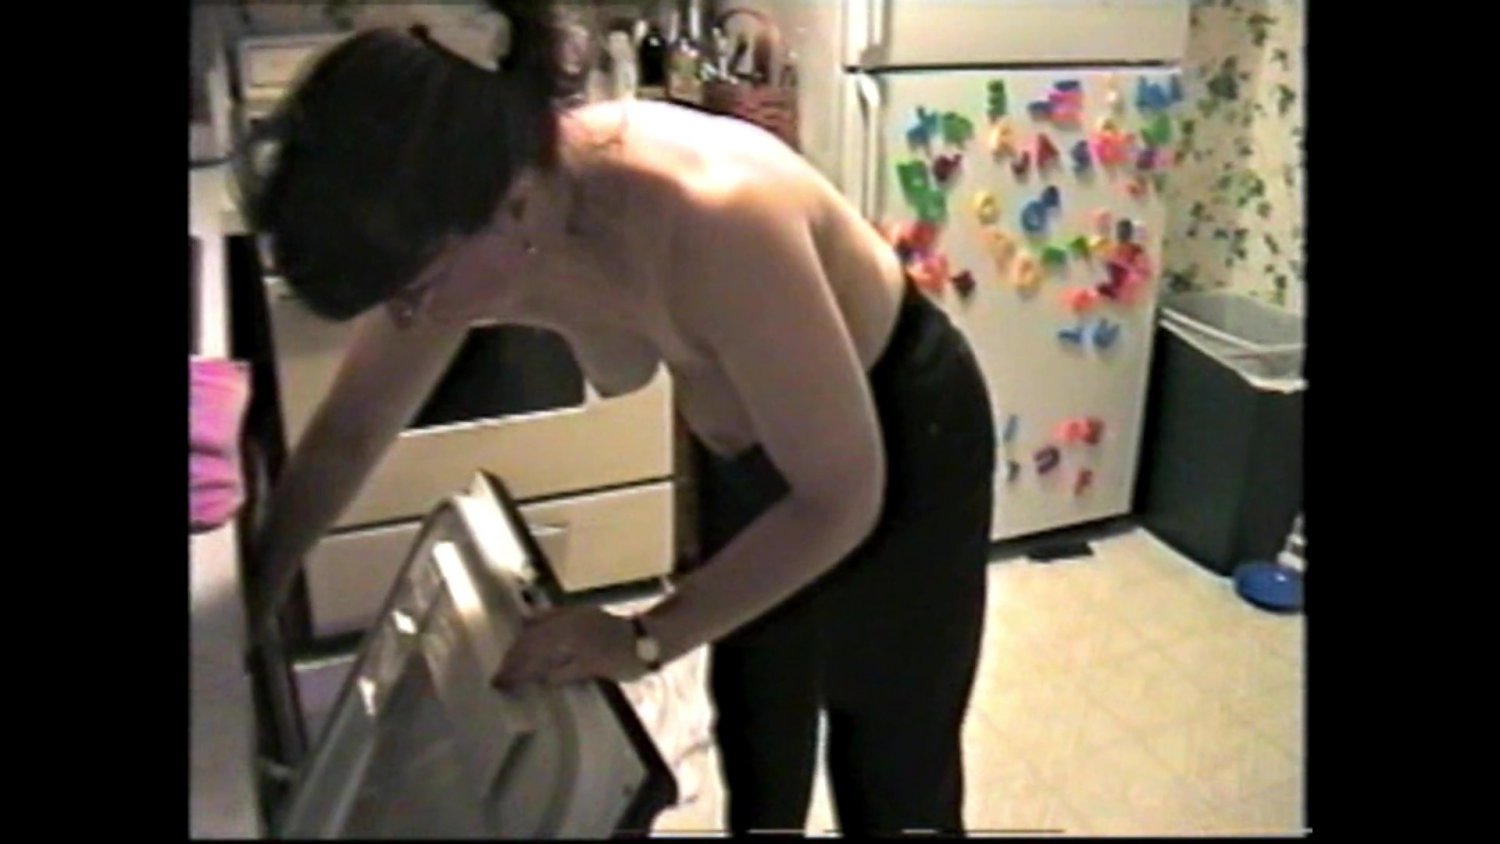 Found a video of my ex-wife doing someones dishes topless for...